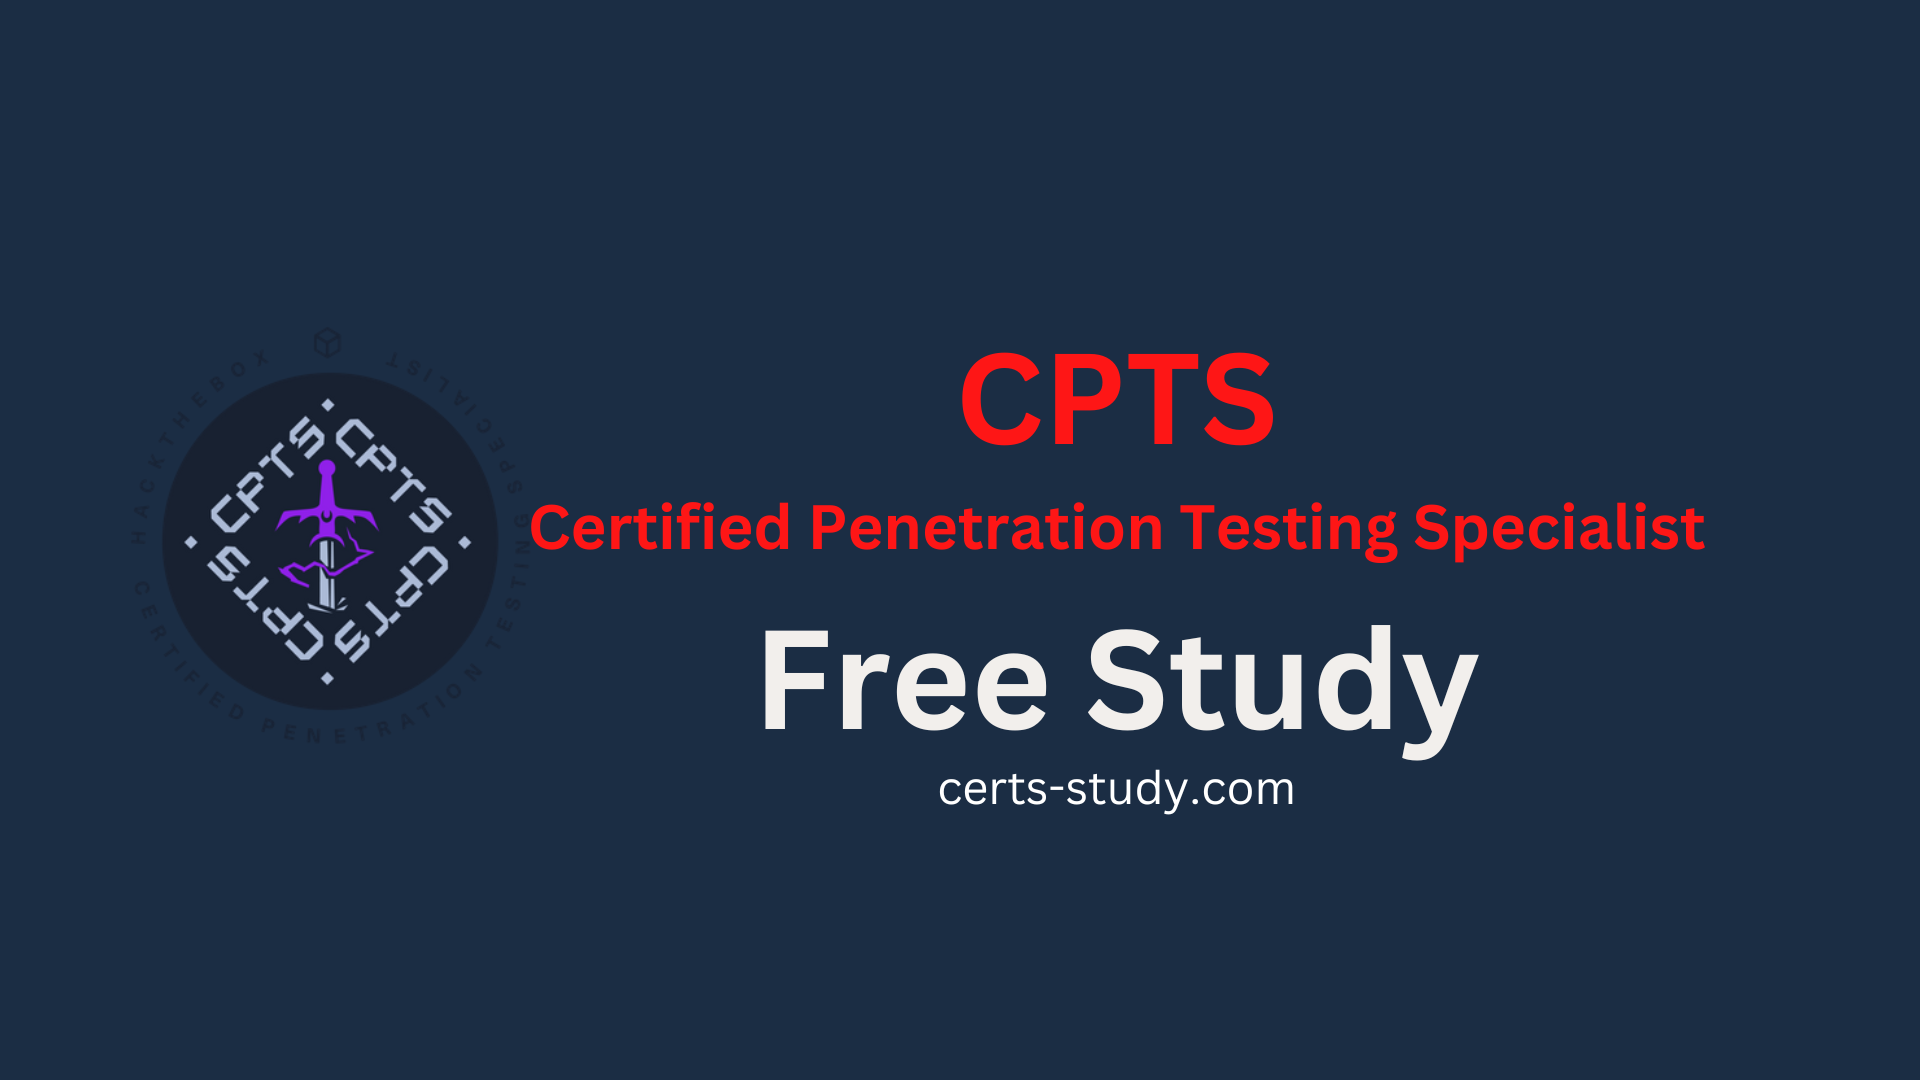 CPTS Certified Penetration Testing Specialist